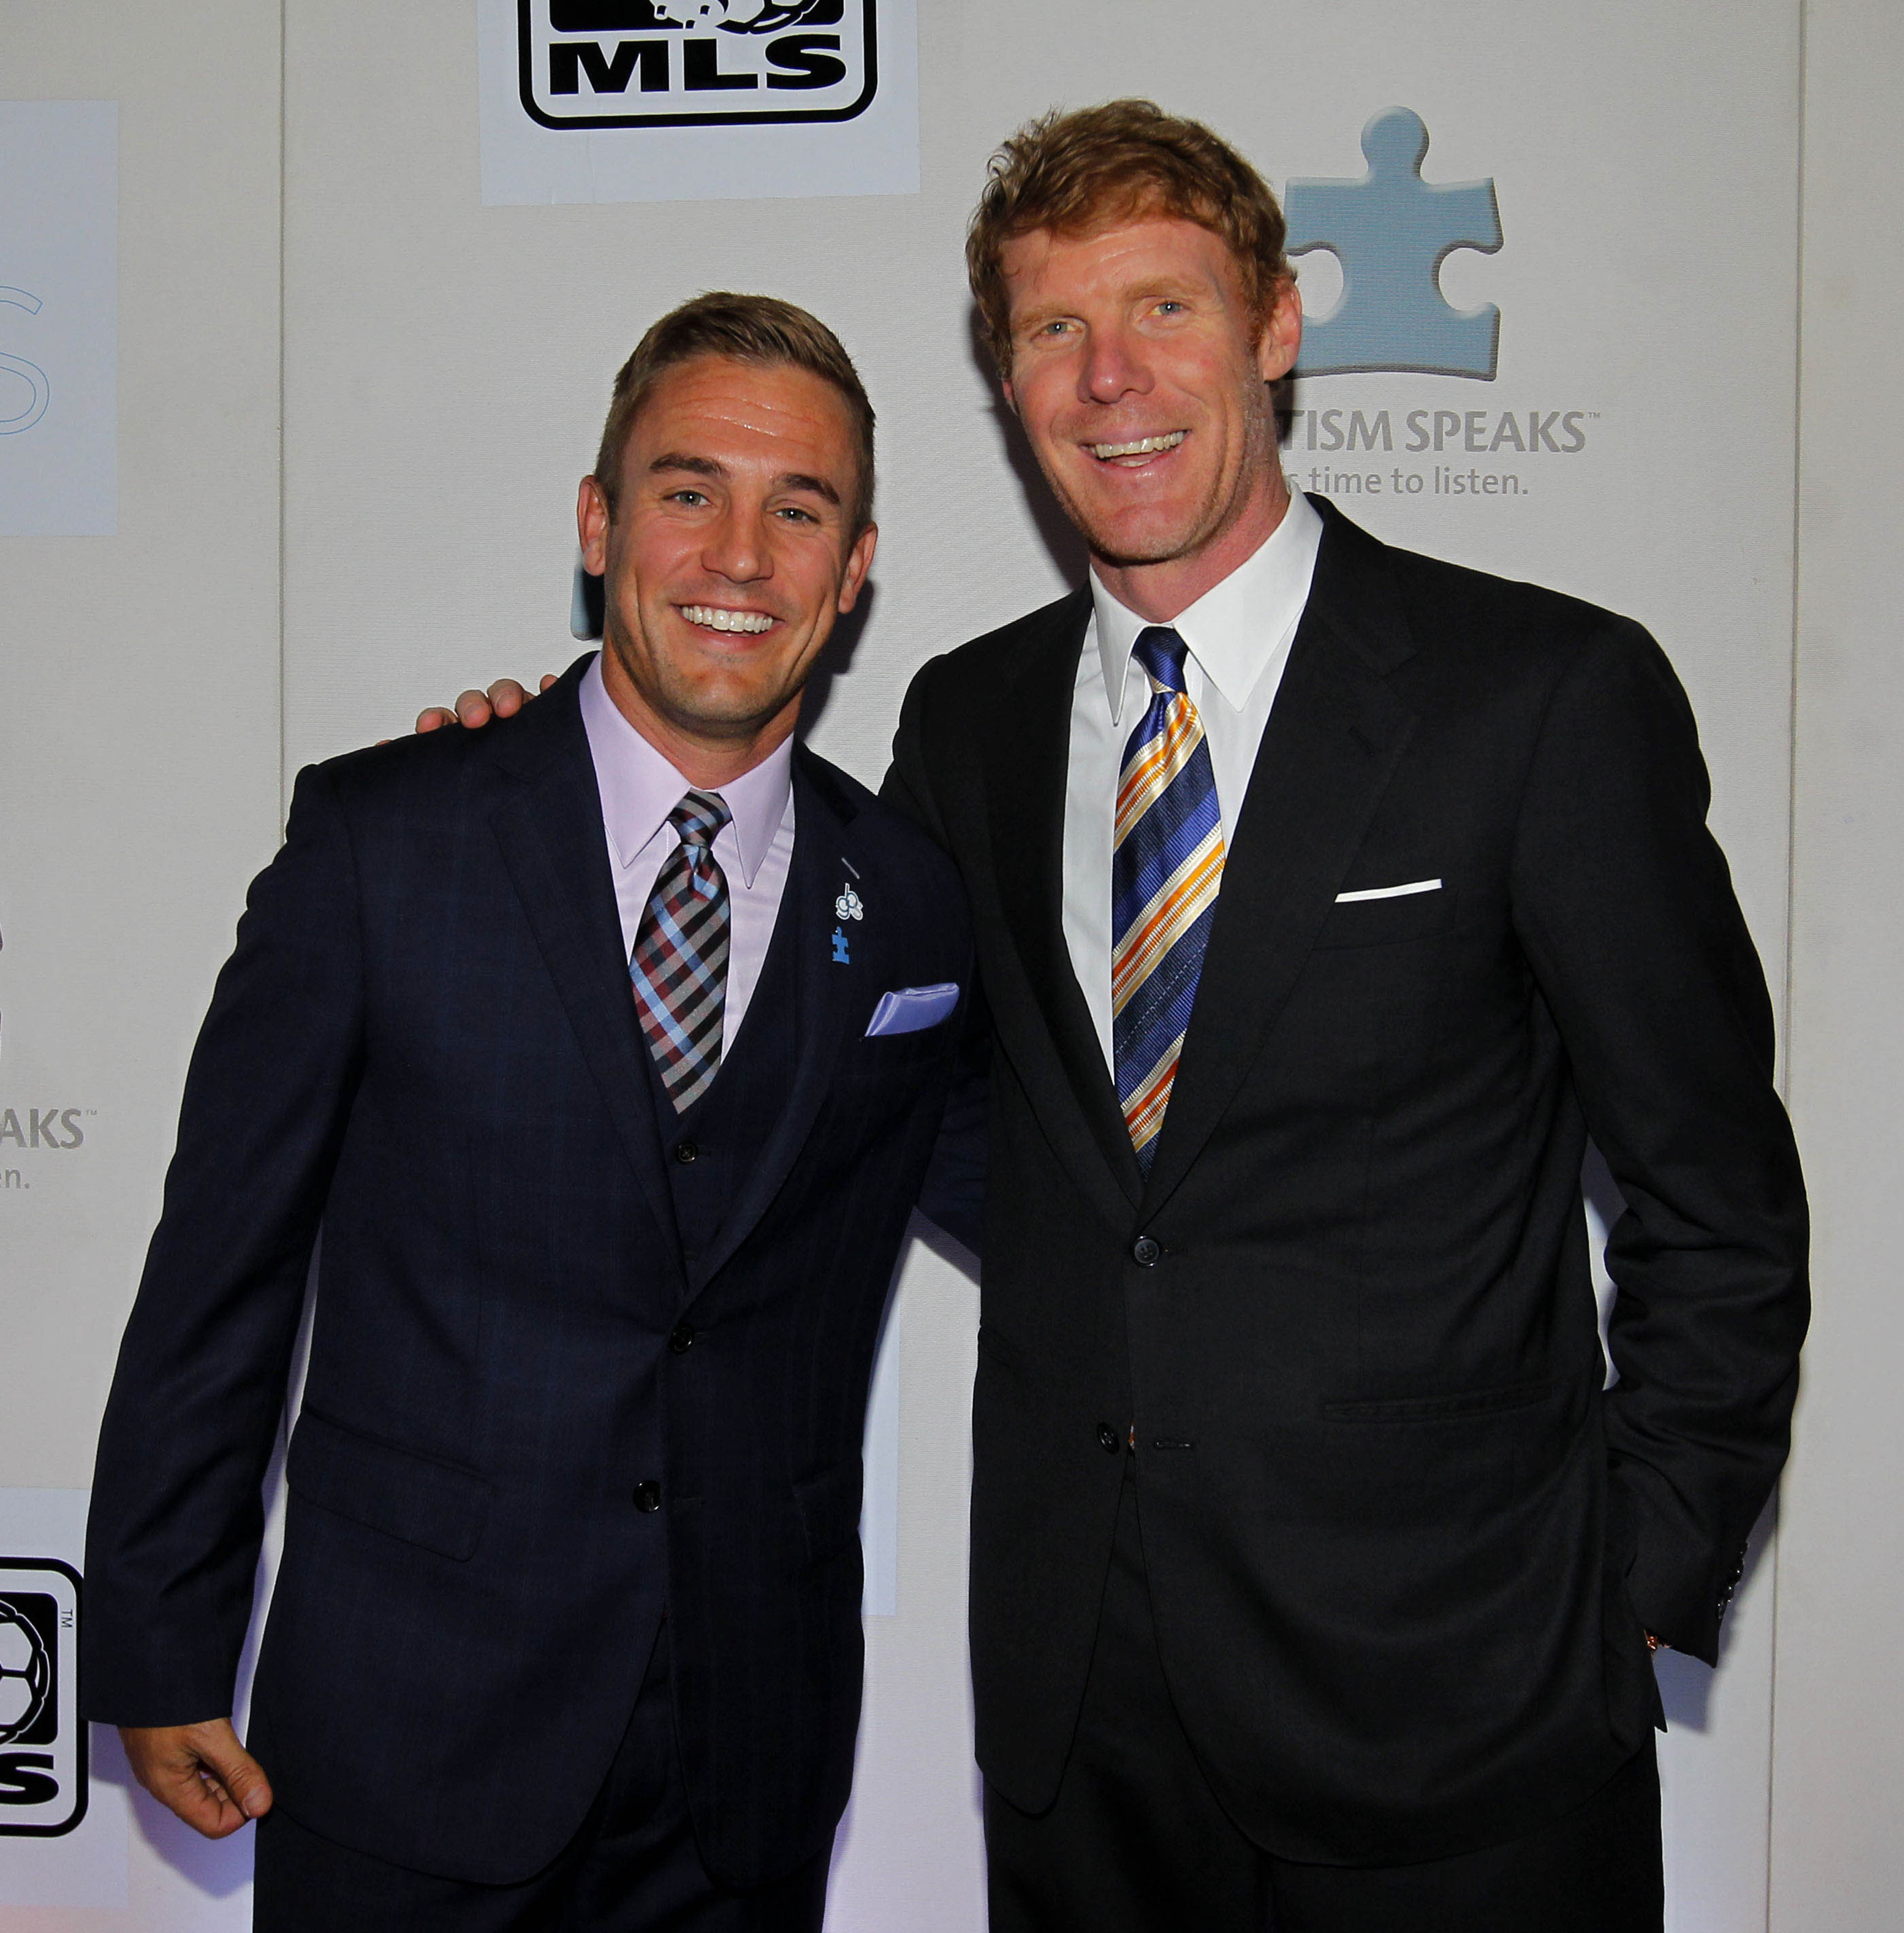 Lalas (right) chatted with Twellman (left) on LA2 stuff.